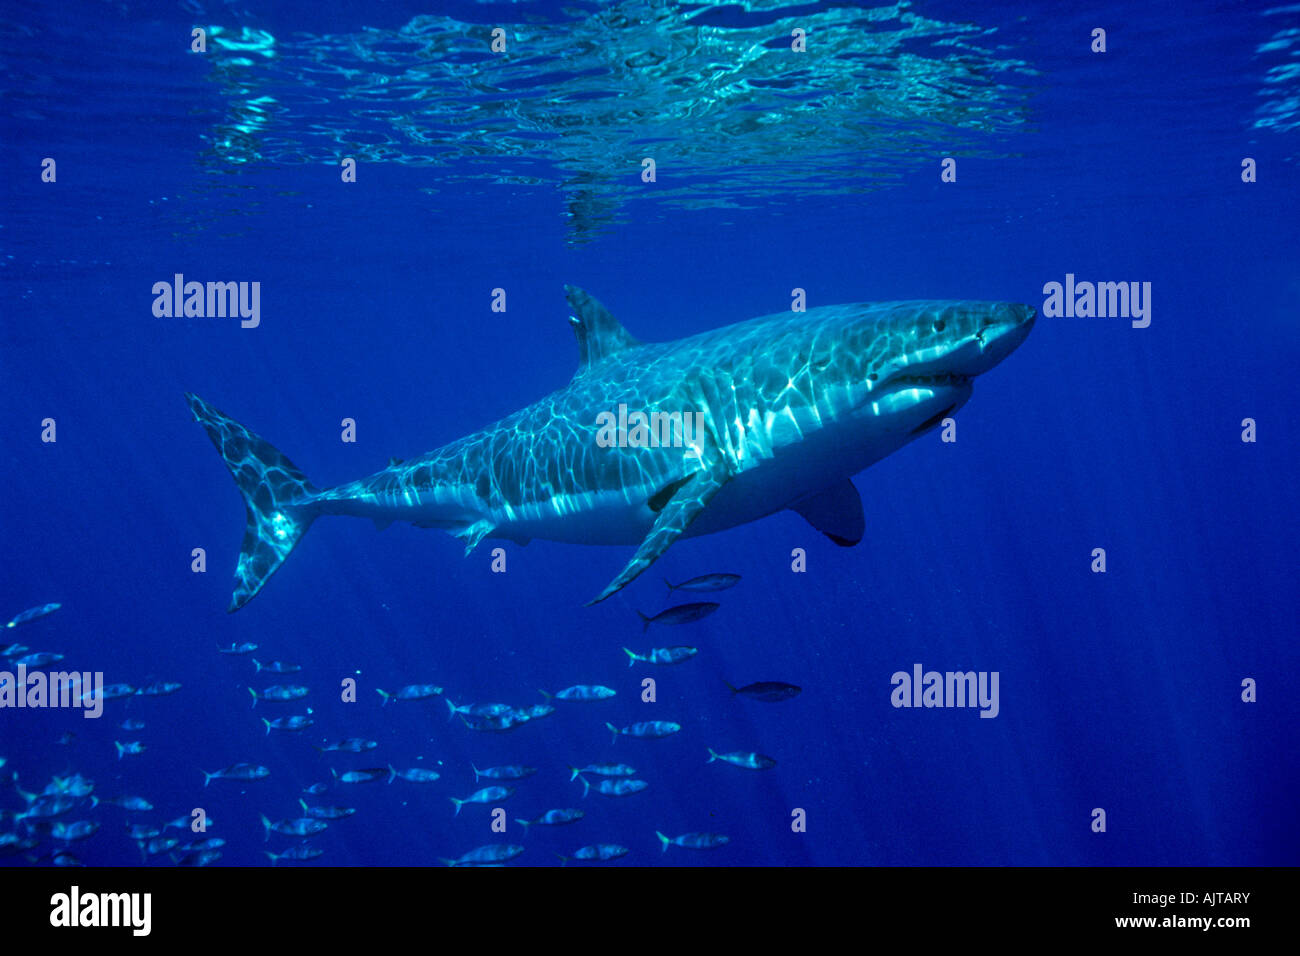 great white shark Carcharodon carcharias Guadalupe Island Pacific Ocean Mexico Stock Photo